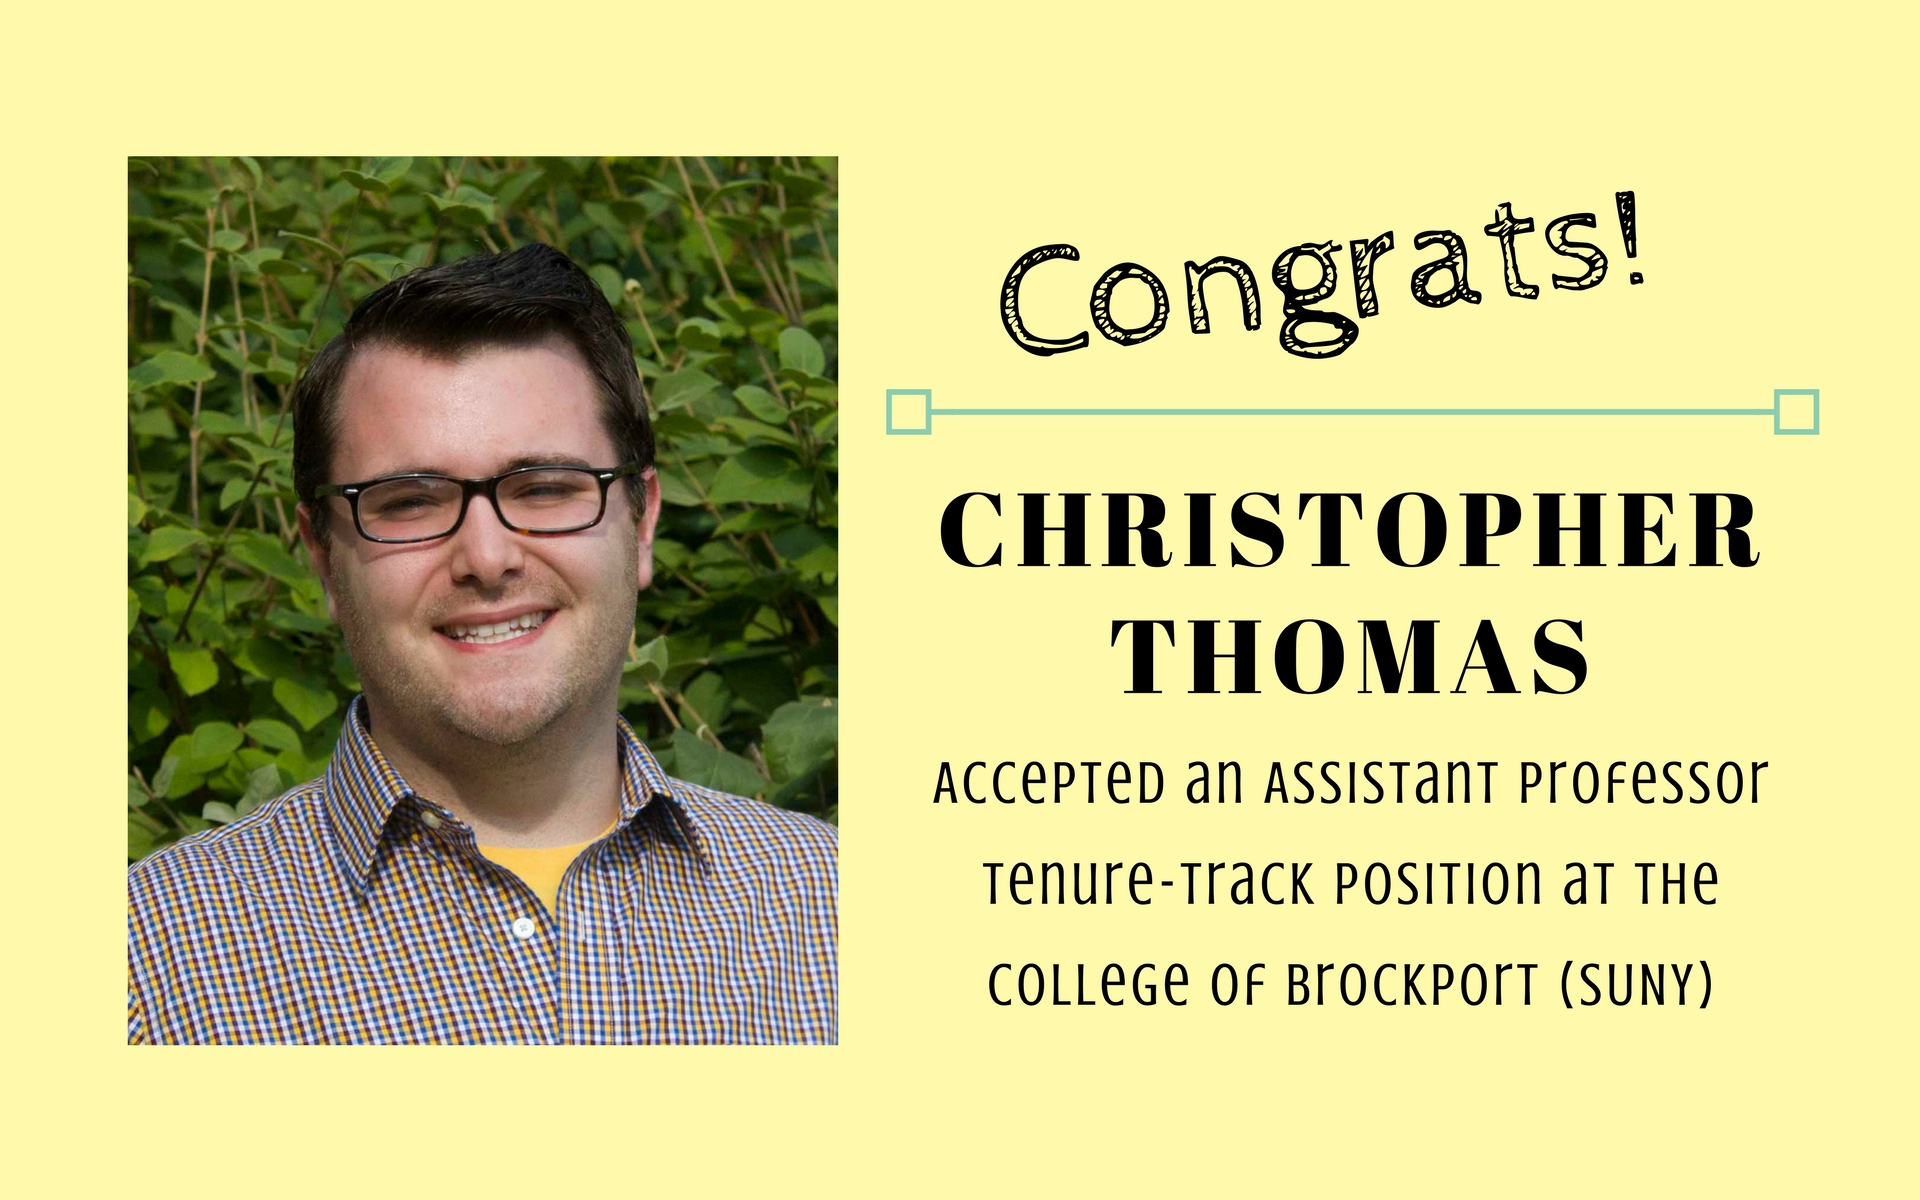 Congrats! christopher thomas accepted an assistant professor tenure-track position at the college of brockport (SUNY)